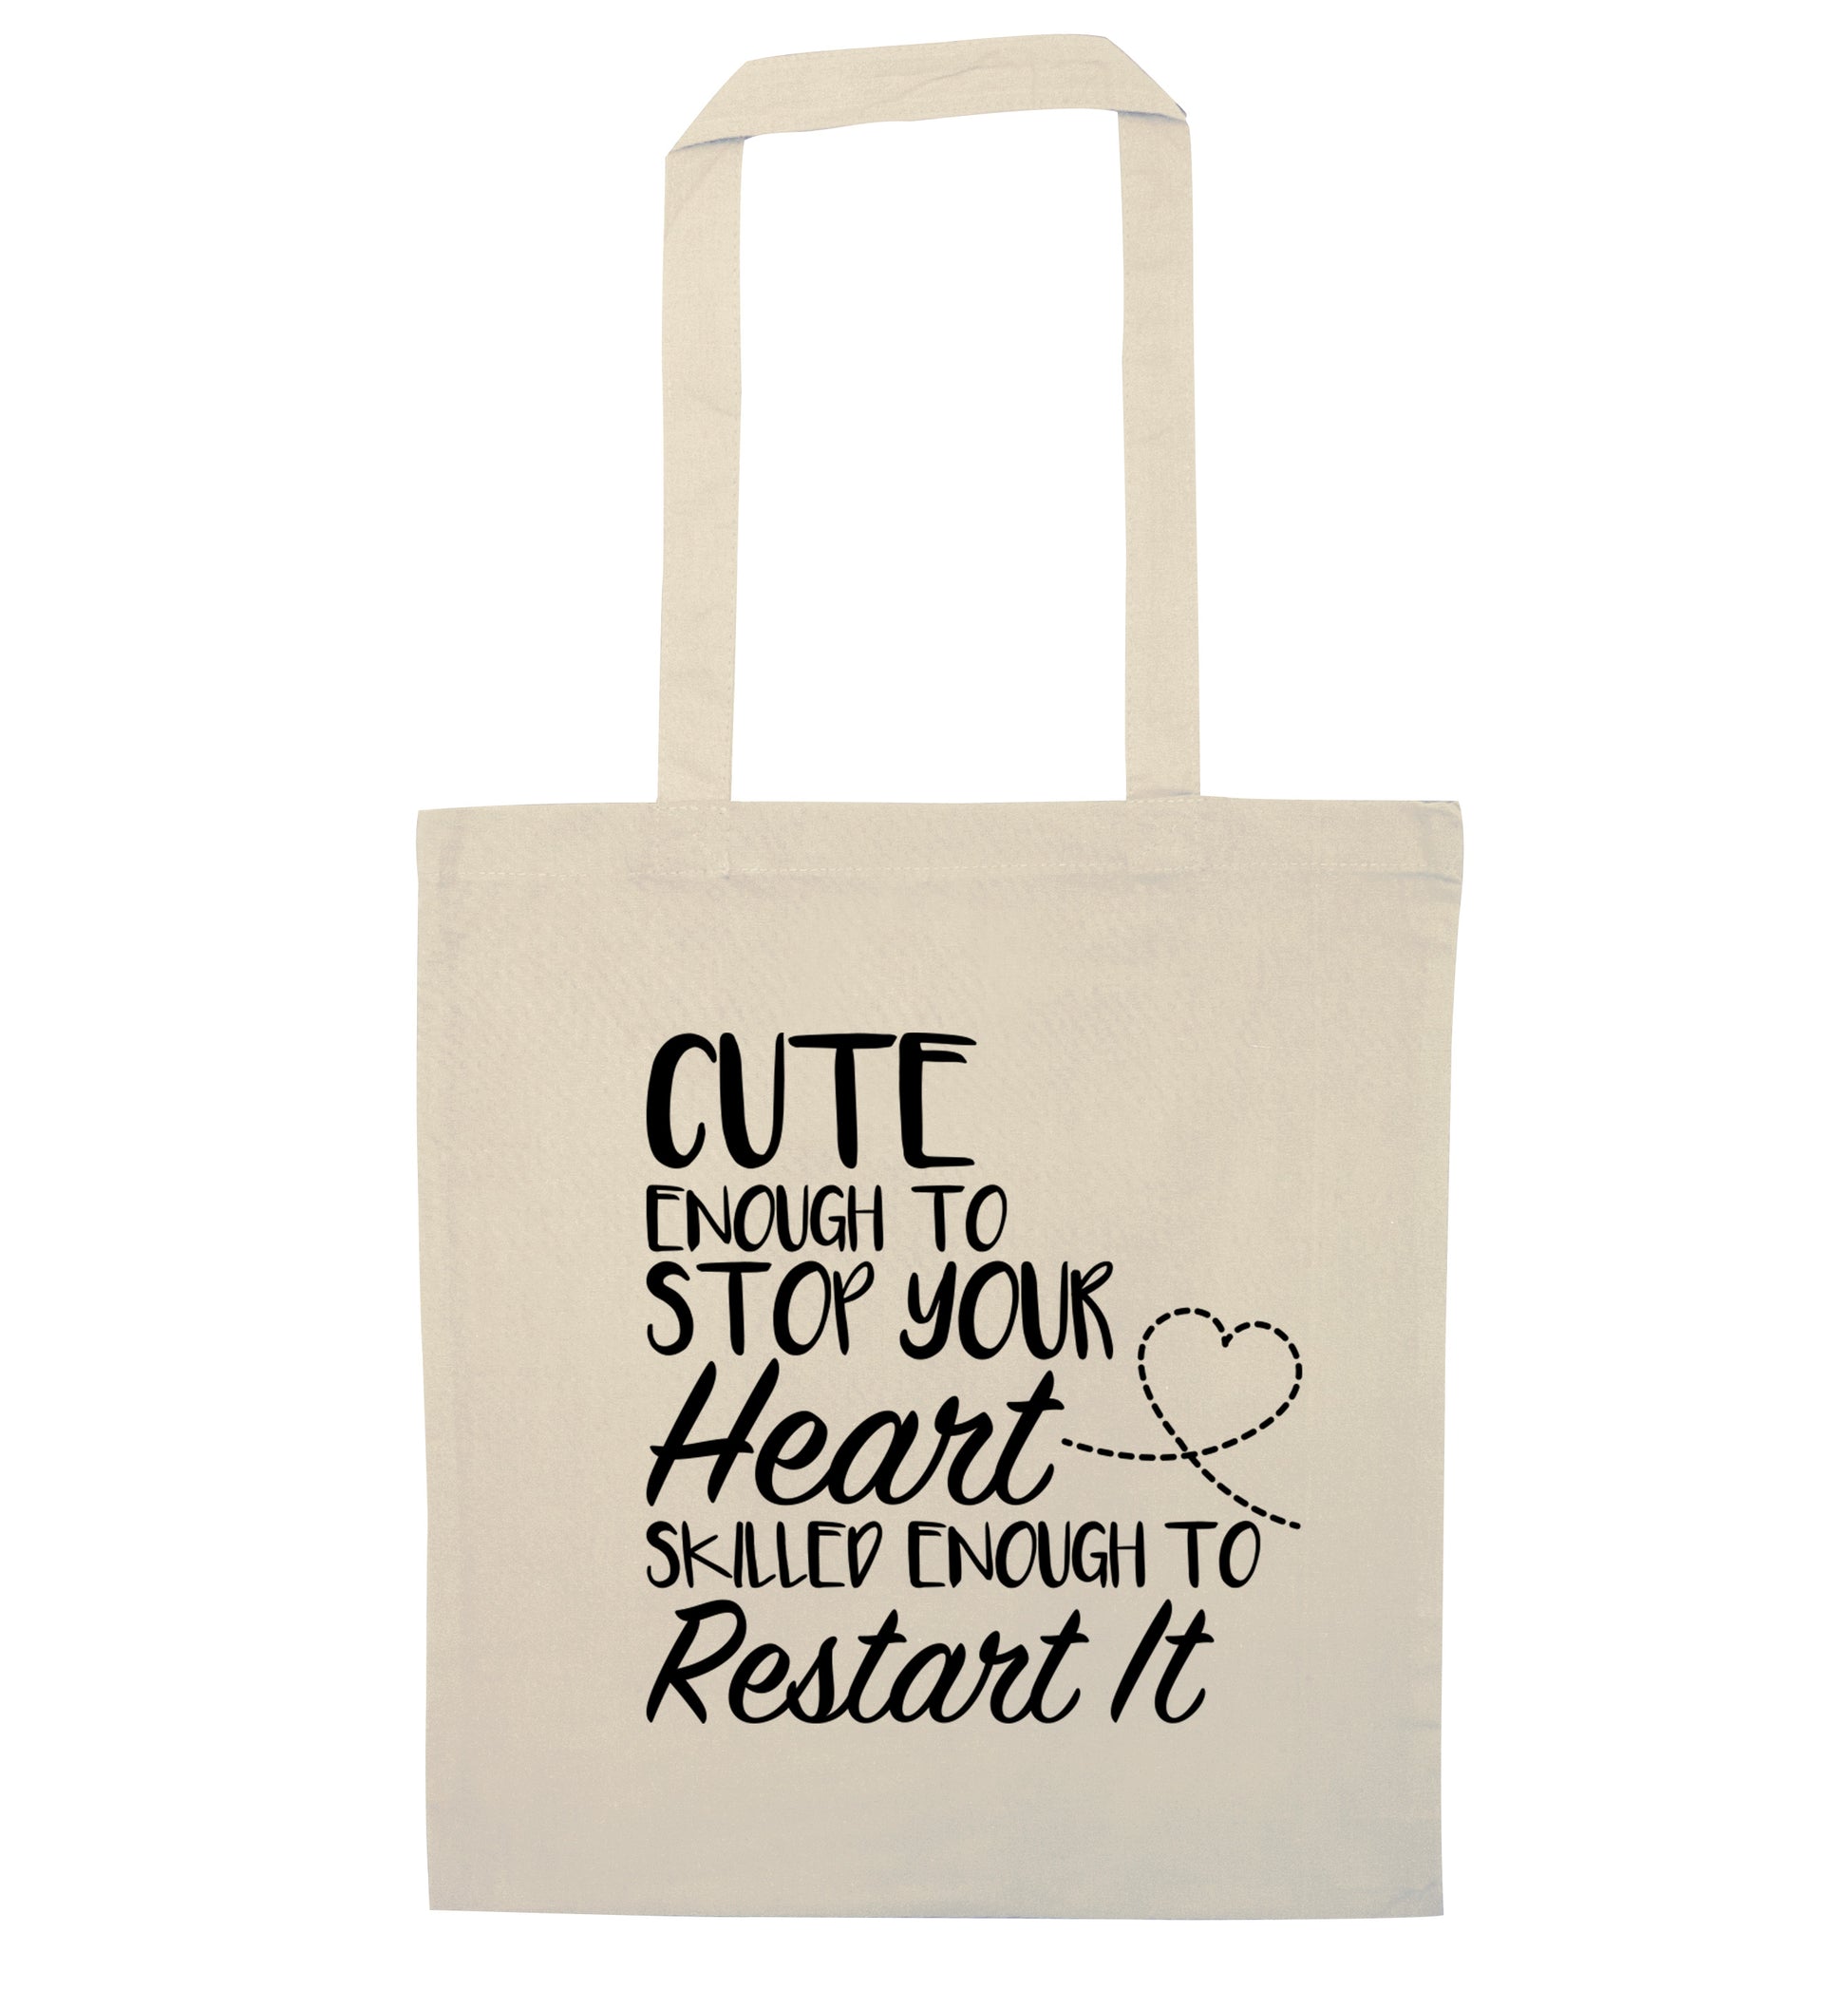 Cute enough to stop your heart skilled enough to restart it natural tote bag